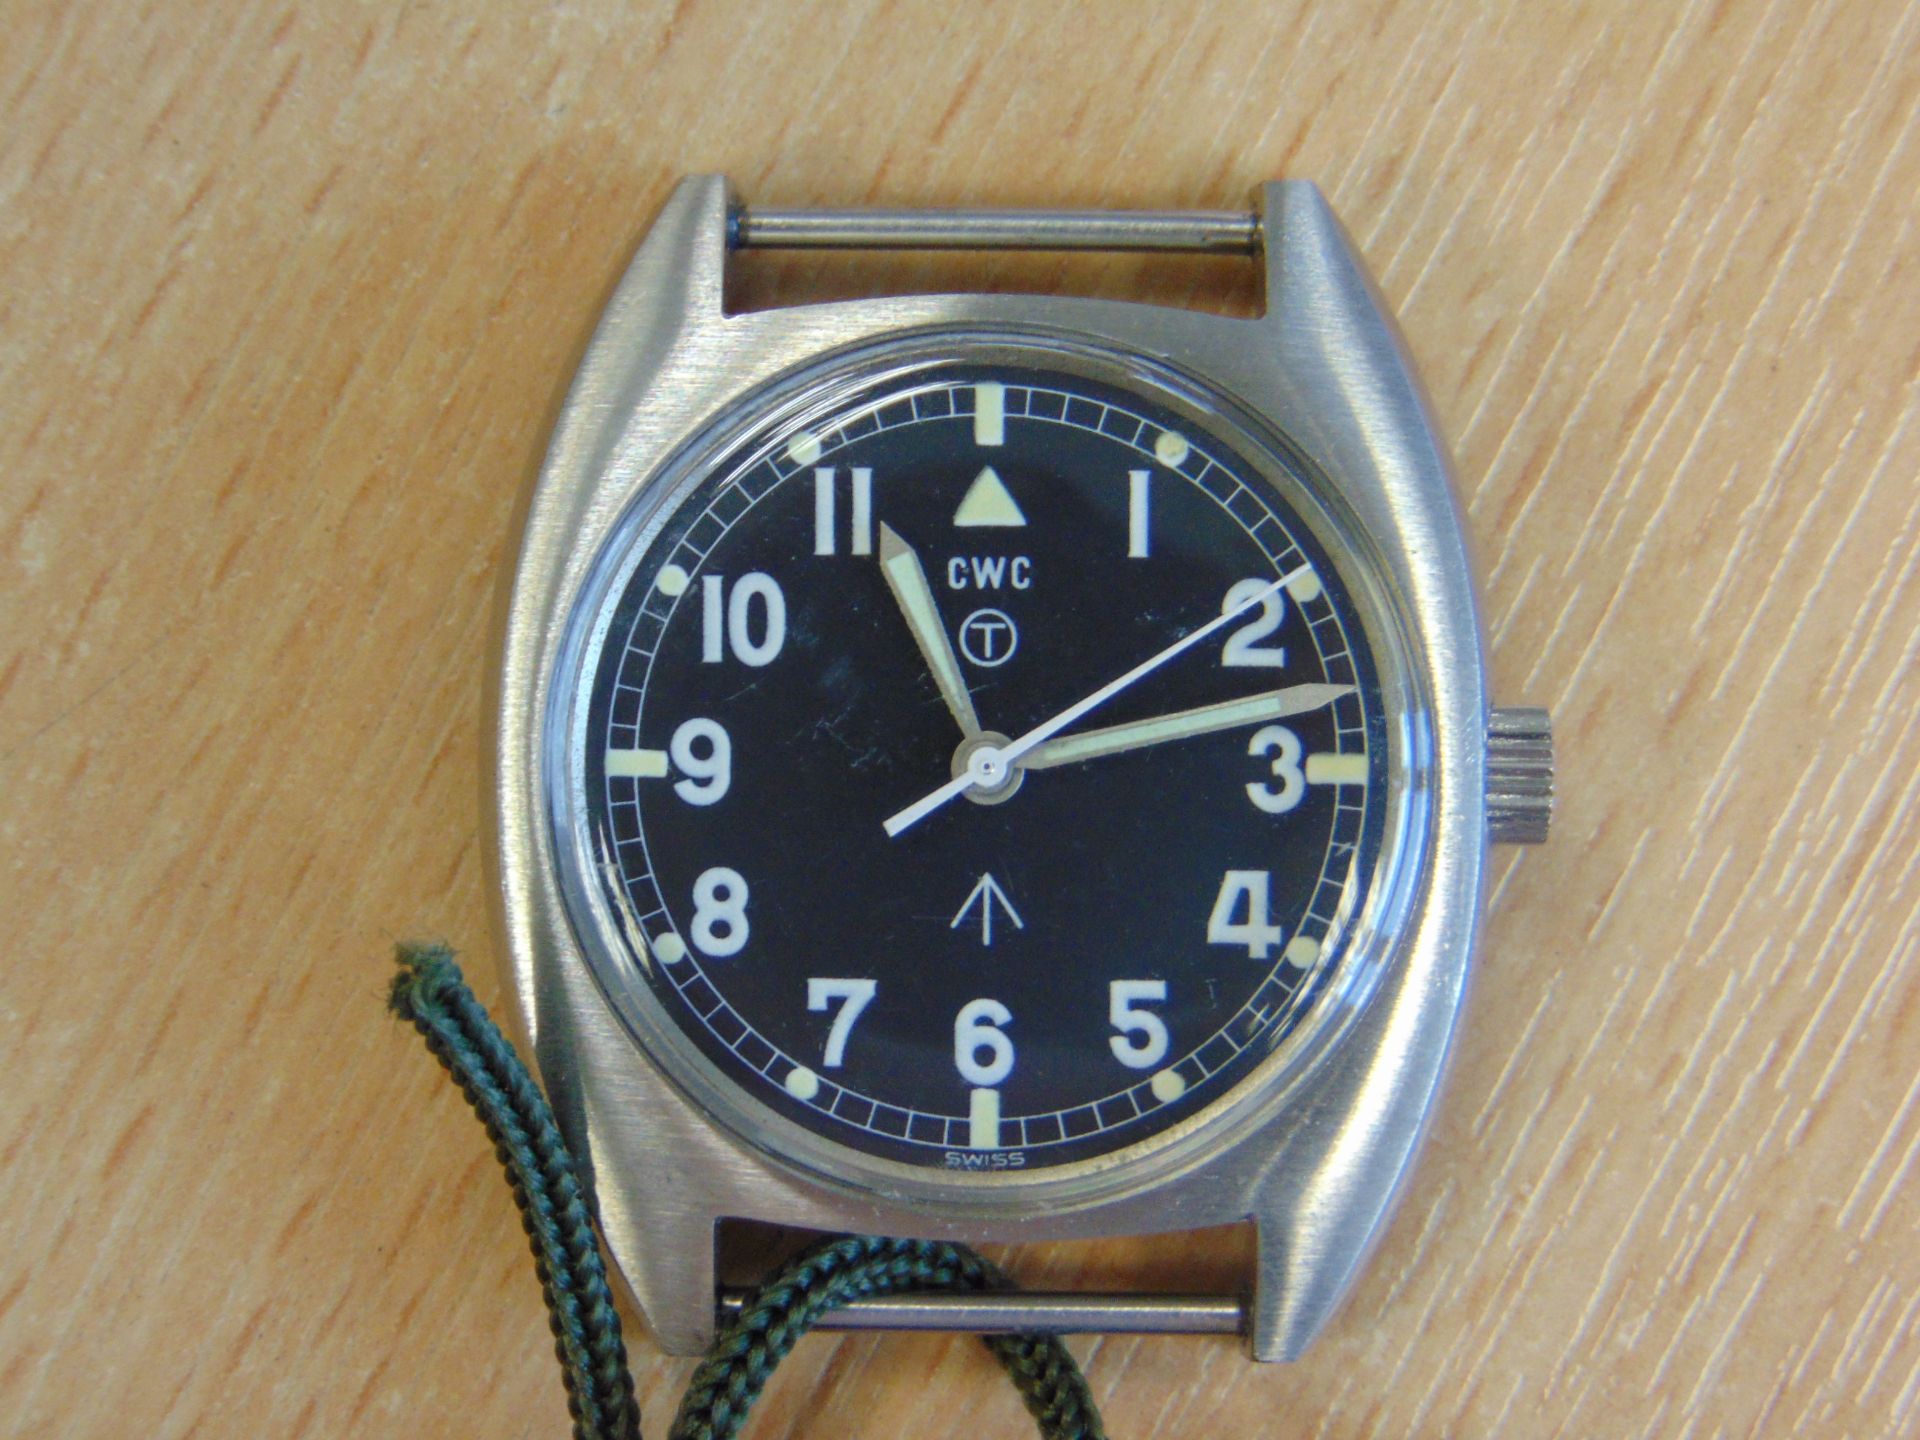 V.V. RARE UNISSUED CWC MECHANICAL W10 BRITISH ARMY SERVICE WATCH NATO MARKINGS DATE 1980